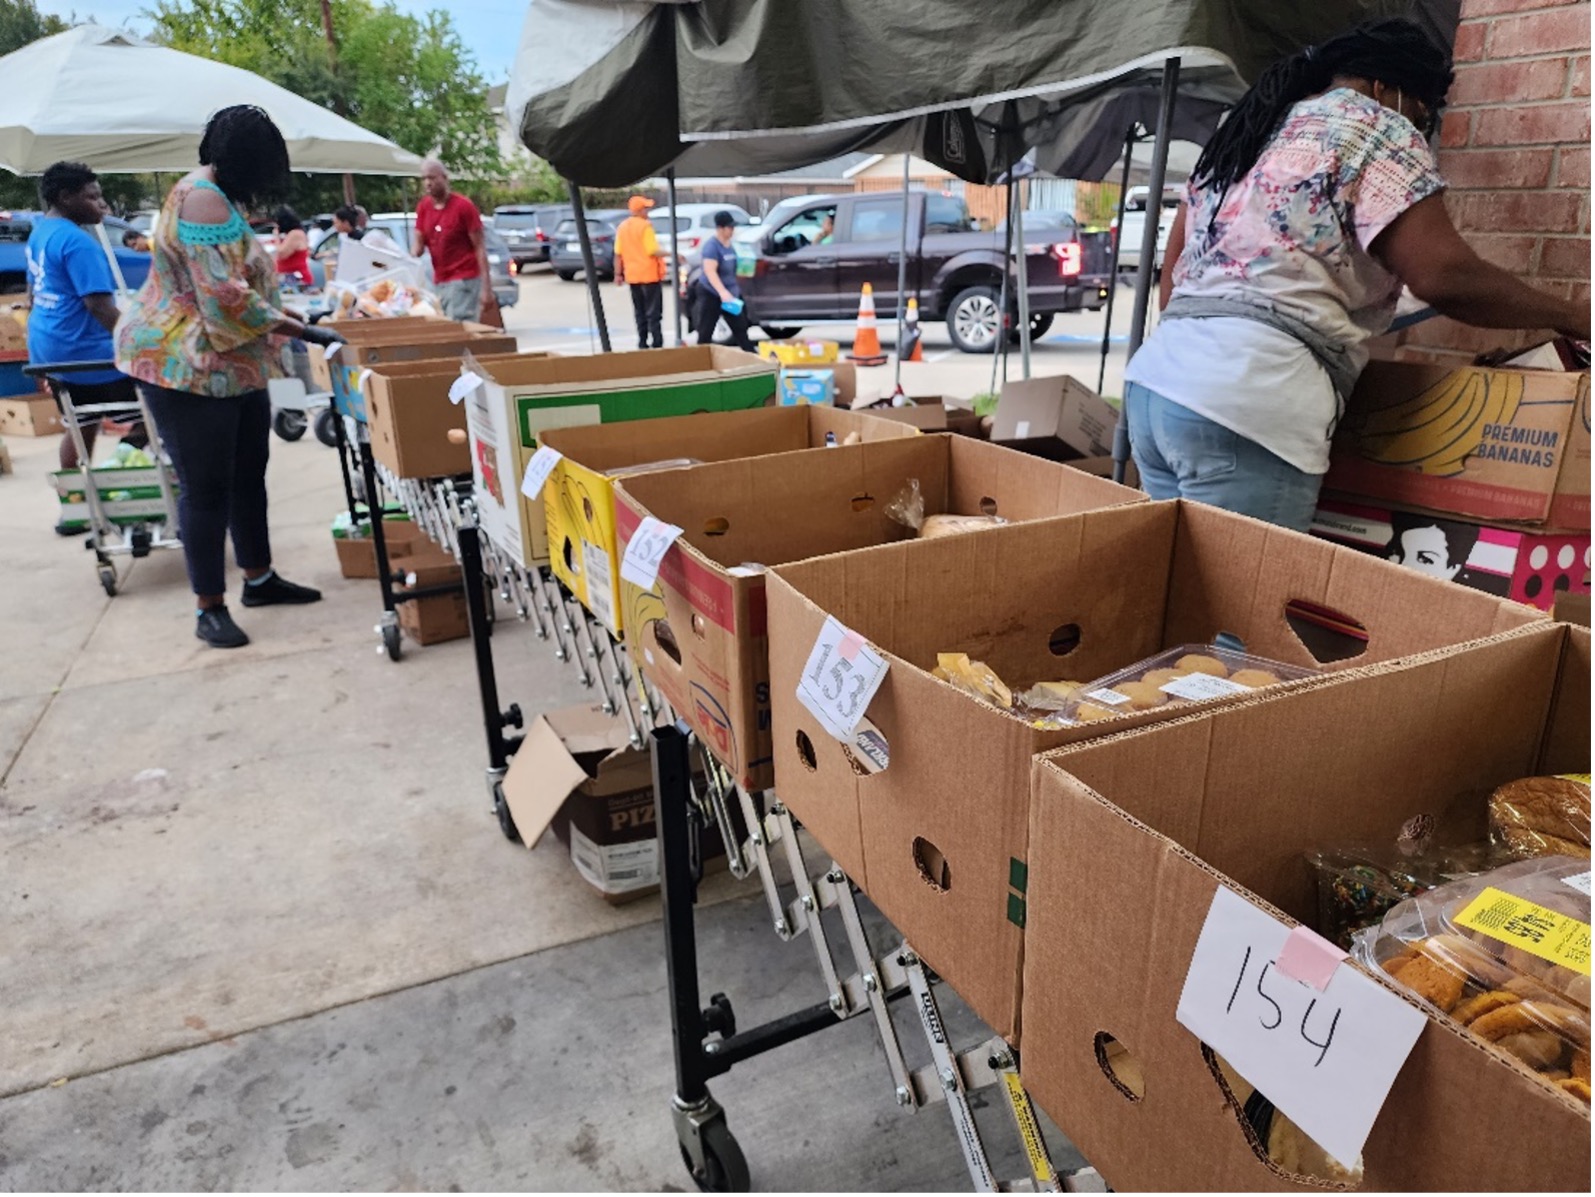 Volunteers keep the boxes rolling as they pack the food allocated for those who signed up for a box. The number on the box corresponds to the number each family has been assigned so the appropriate amount of food will be packed for each. 